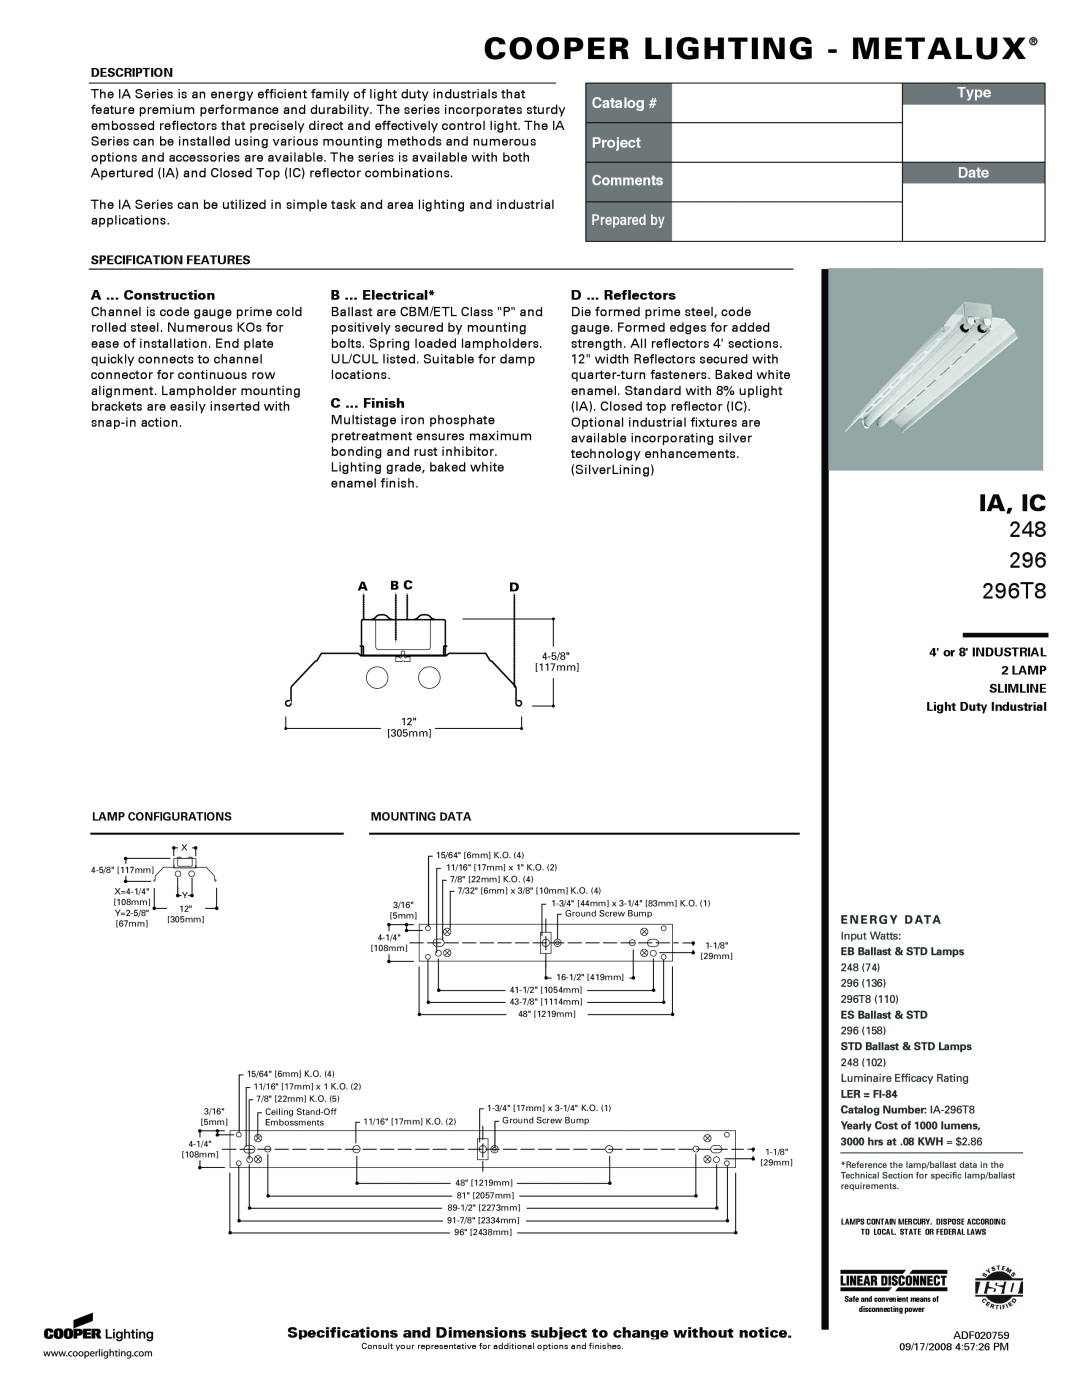 Cooper Lighting BIPAC-8500 specifications Cooper Lighting - Metalux, Ia, Ic, 248, 296T8, Catalog #, Project Comments, Type 